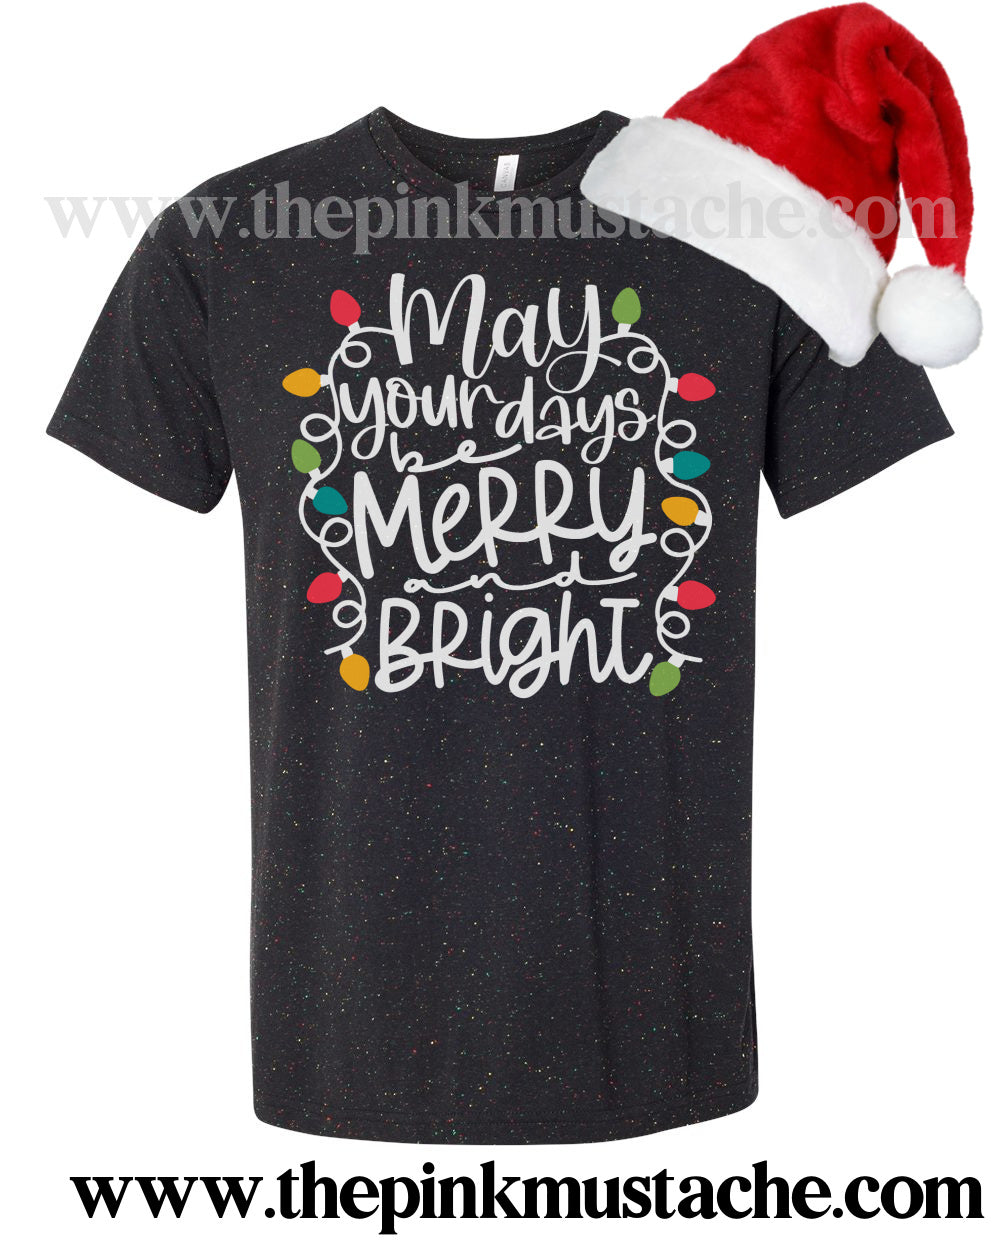 Speckled Bella Canvas Tee- May Your Days Be Merry and Bright - Christmas Lights Quality Tee/ Direct To Garment Printed